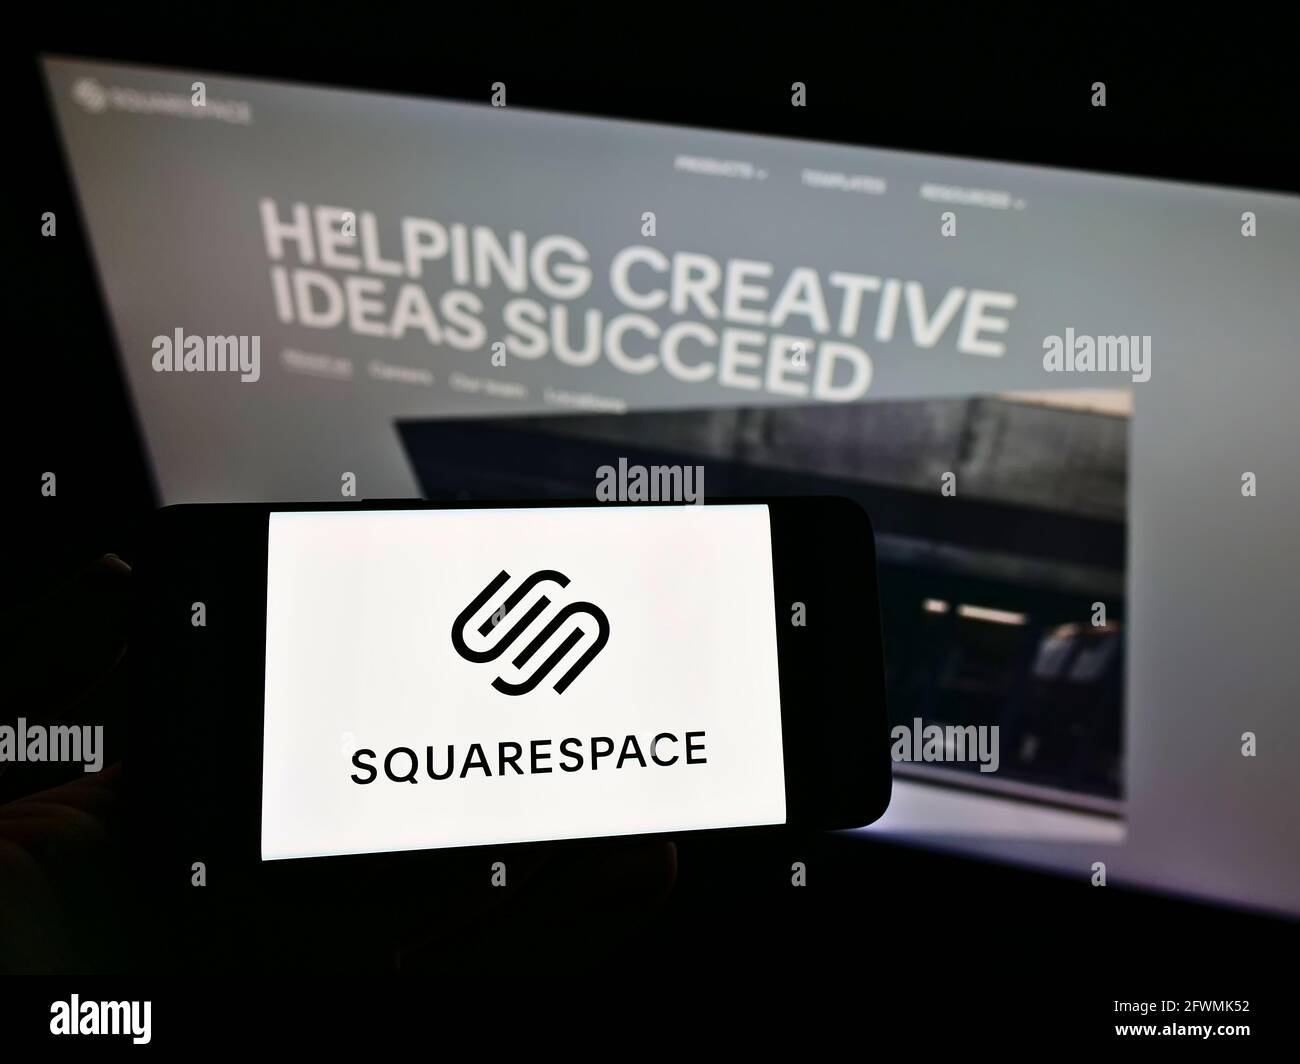 Person holding smartphone with logo of US hosting platform company Squarespace Inc. on screen in front of website. Focus on phone display. Stock Photo